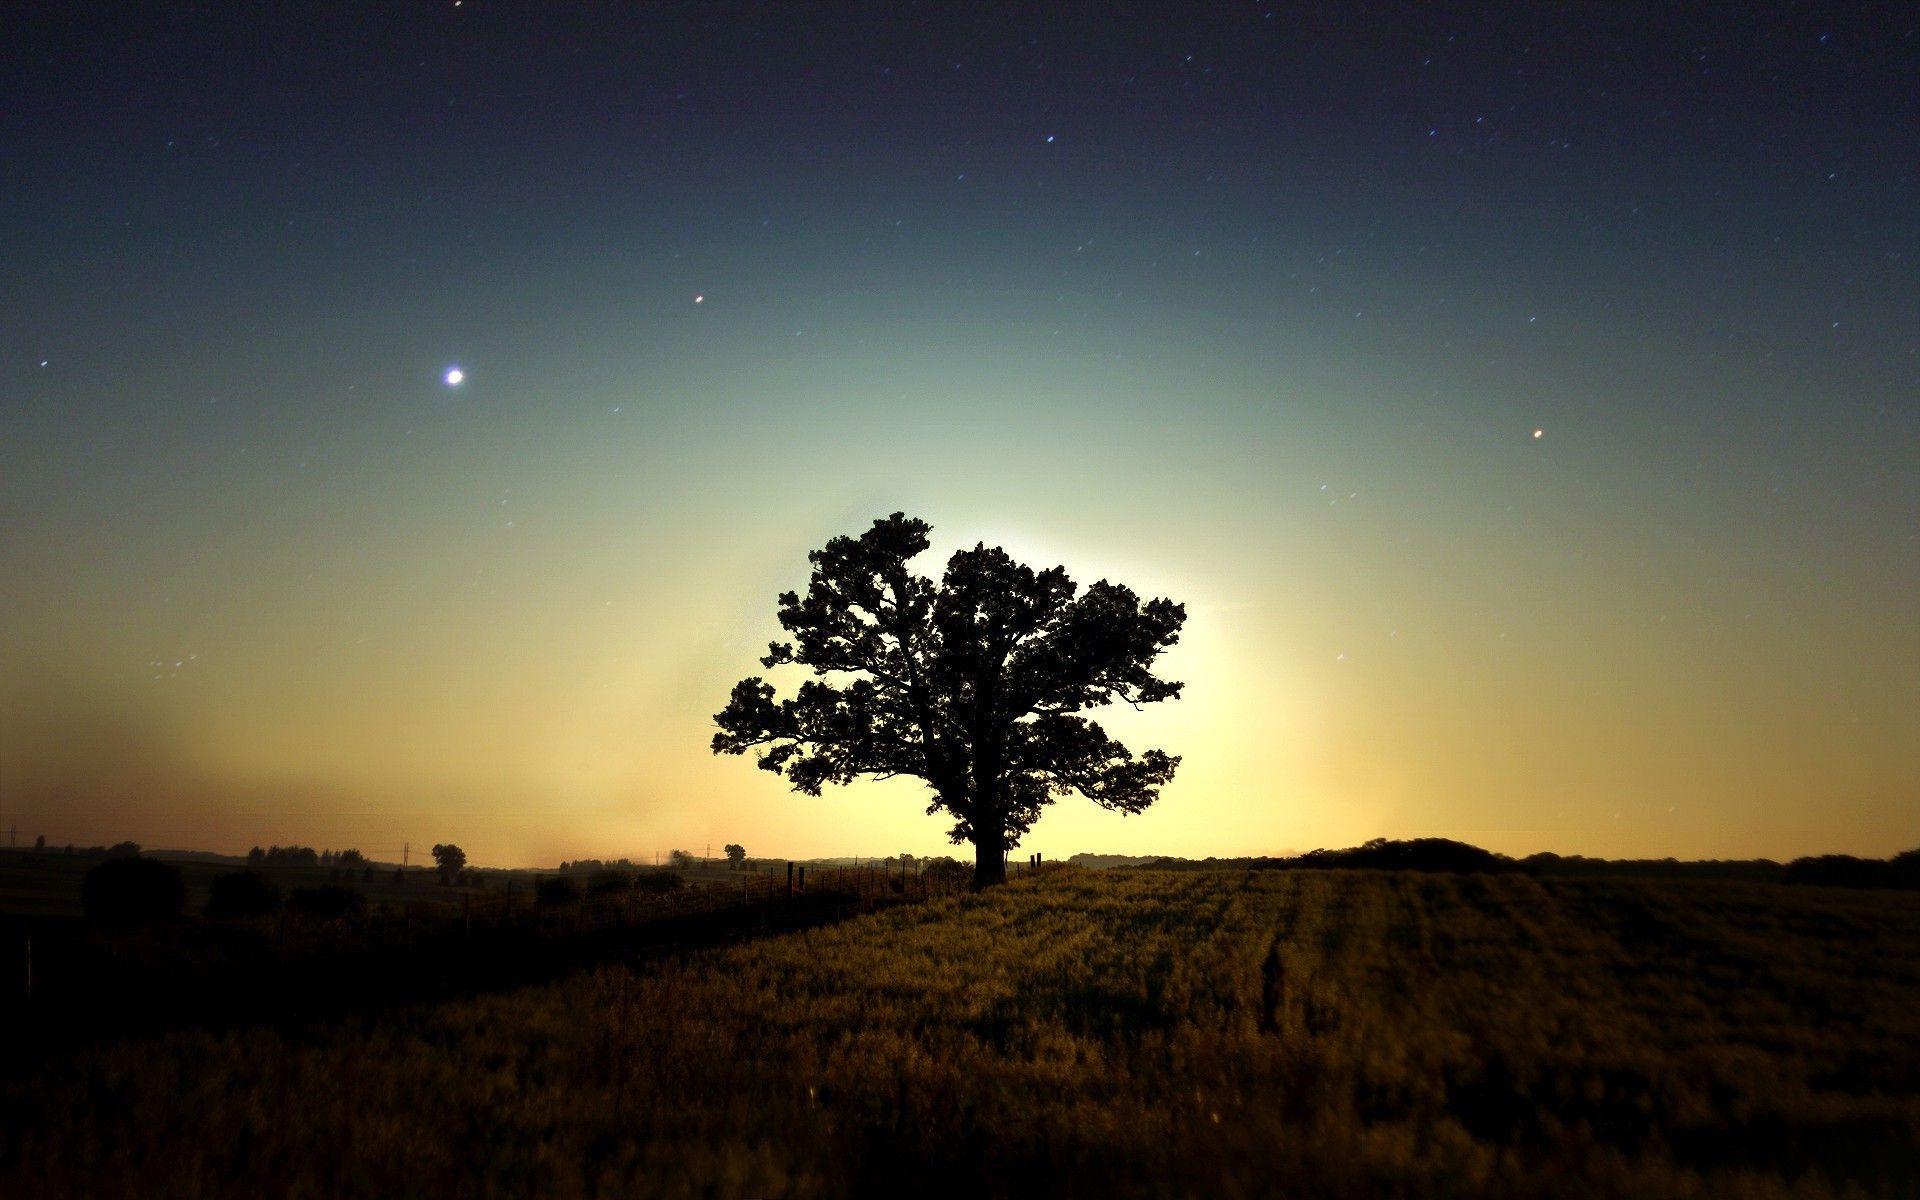 Nature Night Hd Wallpapers - Top Free Nature Night Hd Backgrounds